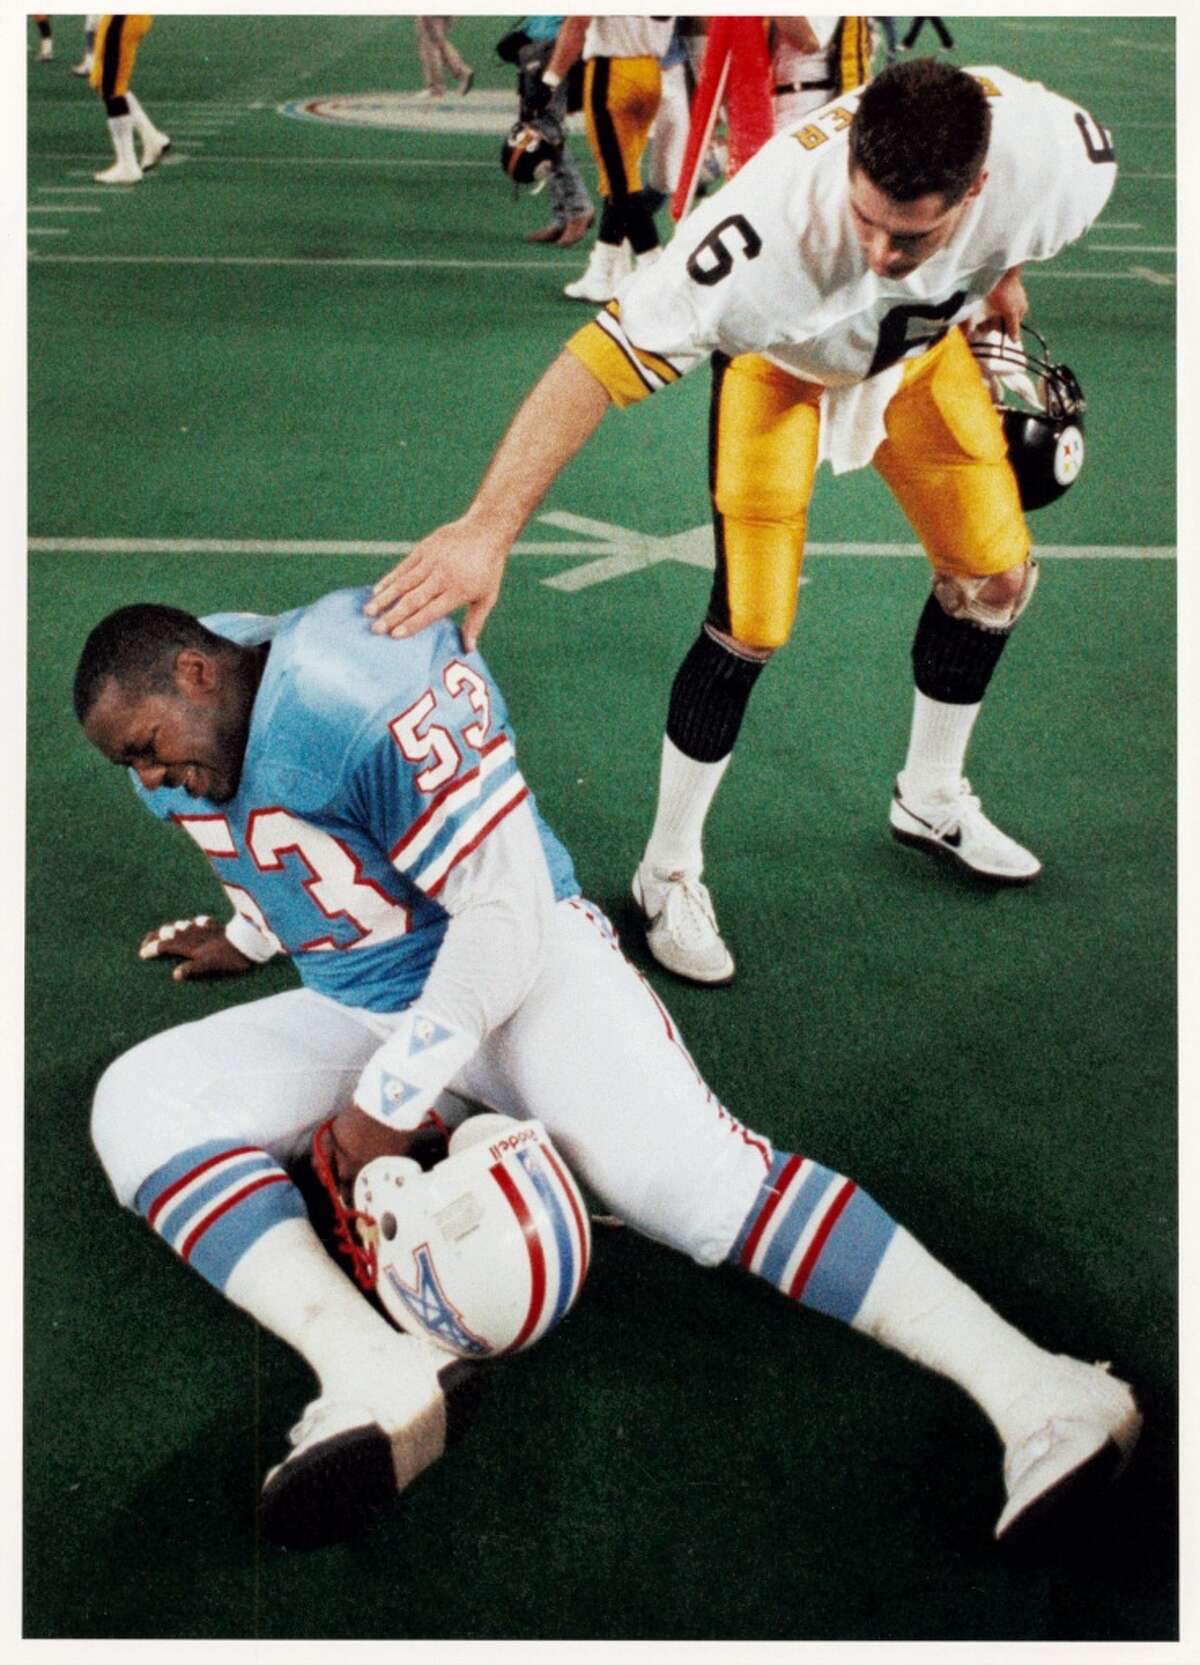 1989: Steelers 26, Oilers 23 (OT) The Jerry Glanville era ended in crushing fashion. The Oilers held a late lead, only to see the Steelers tie the score on Merrill Hoge’s 2-yard touchdown run with 46 seconds left. Then, after a Lorenzo White fumble in overtime, Pittsburgh’s Gary Anderson made a 50-yard field goal to oust the Oilers.